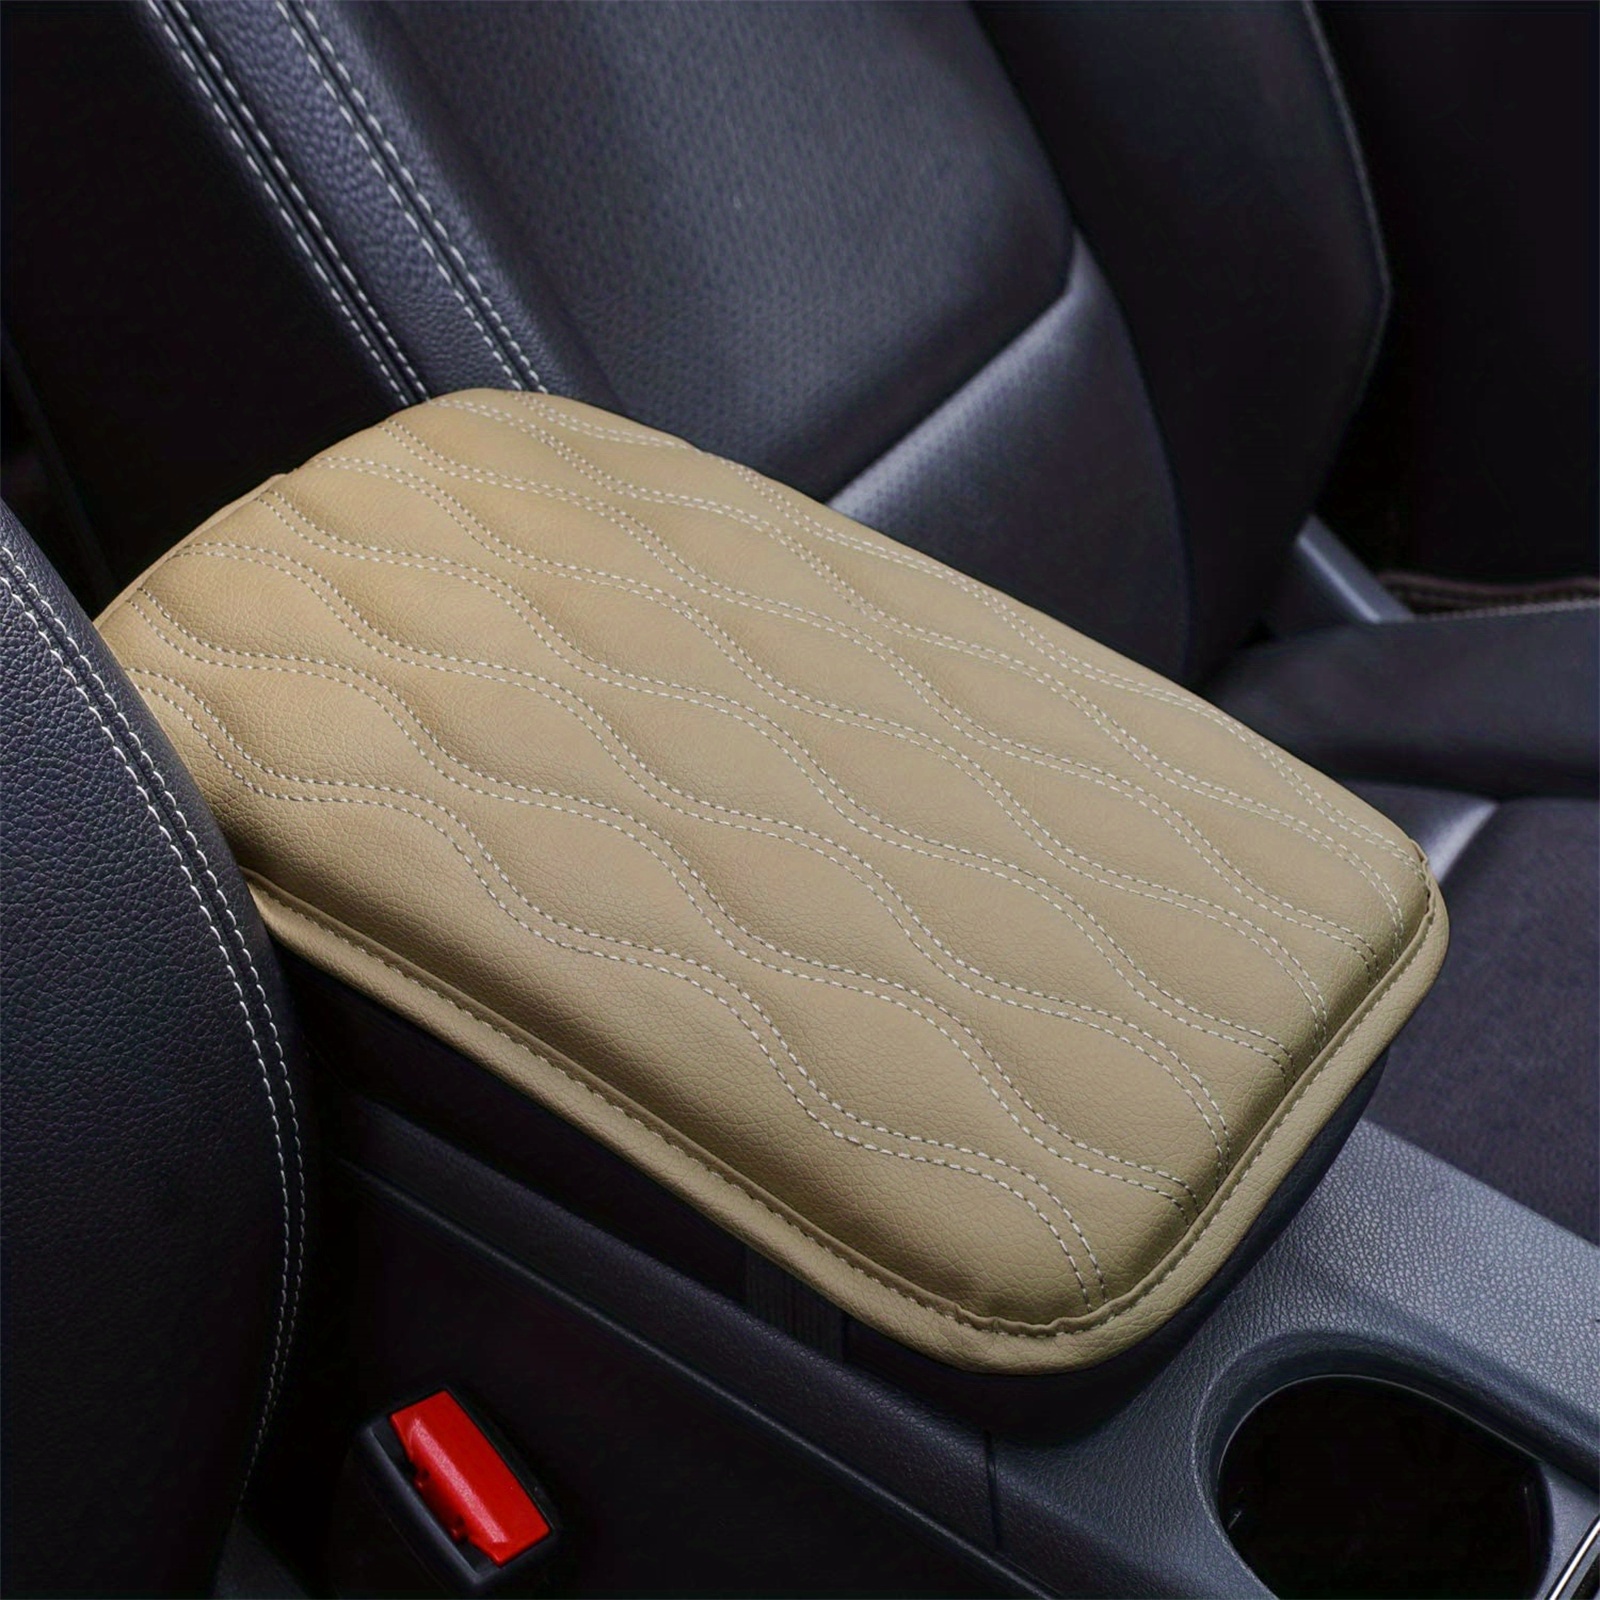  Car Center Console Cushion Pad, Universal Leather Waterproof  Armrest Seat Box Cover Protector,Comfortable Car Decor Accessories Fit for  Most Cars, Vehicles, SUVs (White) : Automotive